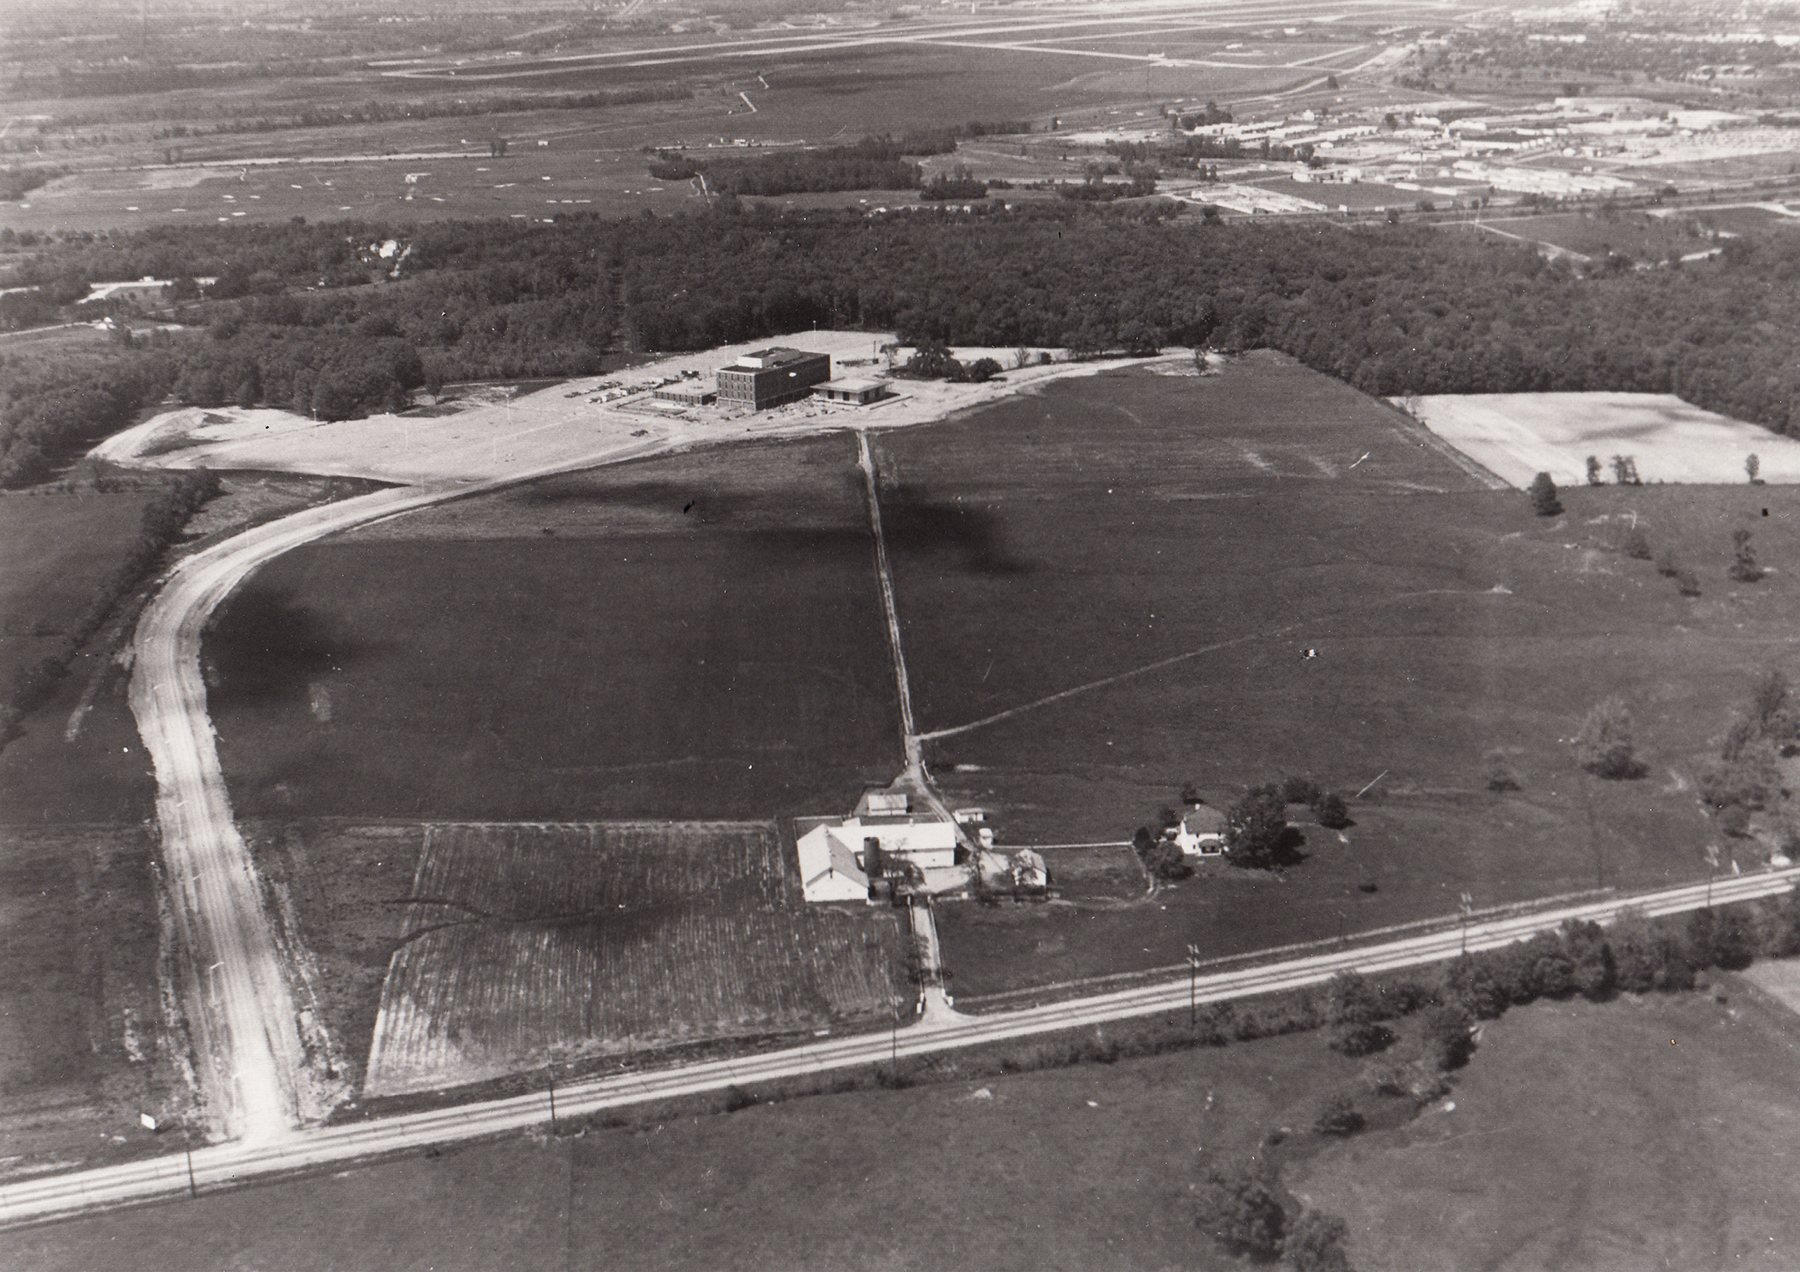 Aerial view of Dayton Campus (now WSU), showing Airway Road and the Warner farm (foreground), the "Dayton Campus" sign (lower left), Allyn Hall (top center), and a portion of Wright-Patterson AFB (upper right). (University Archives)